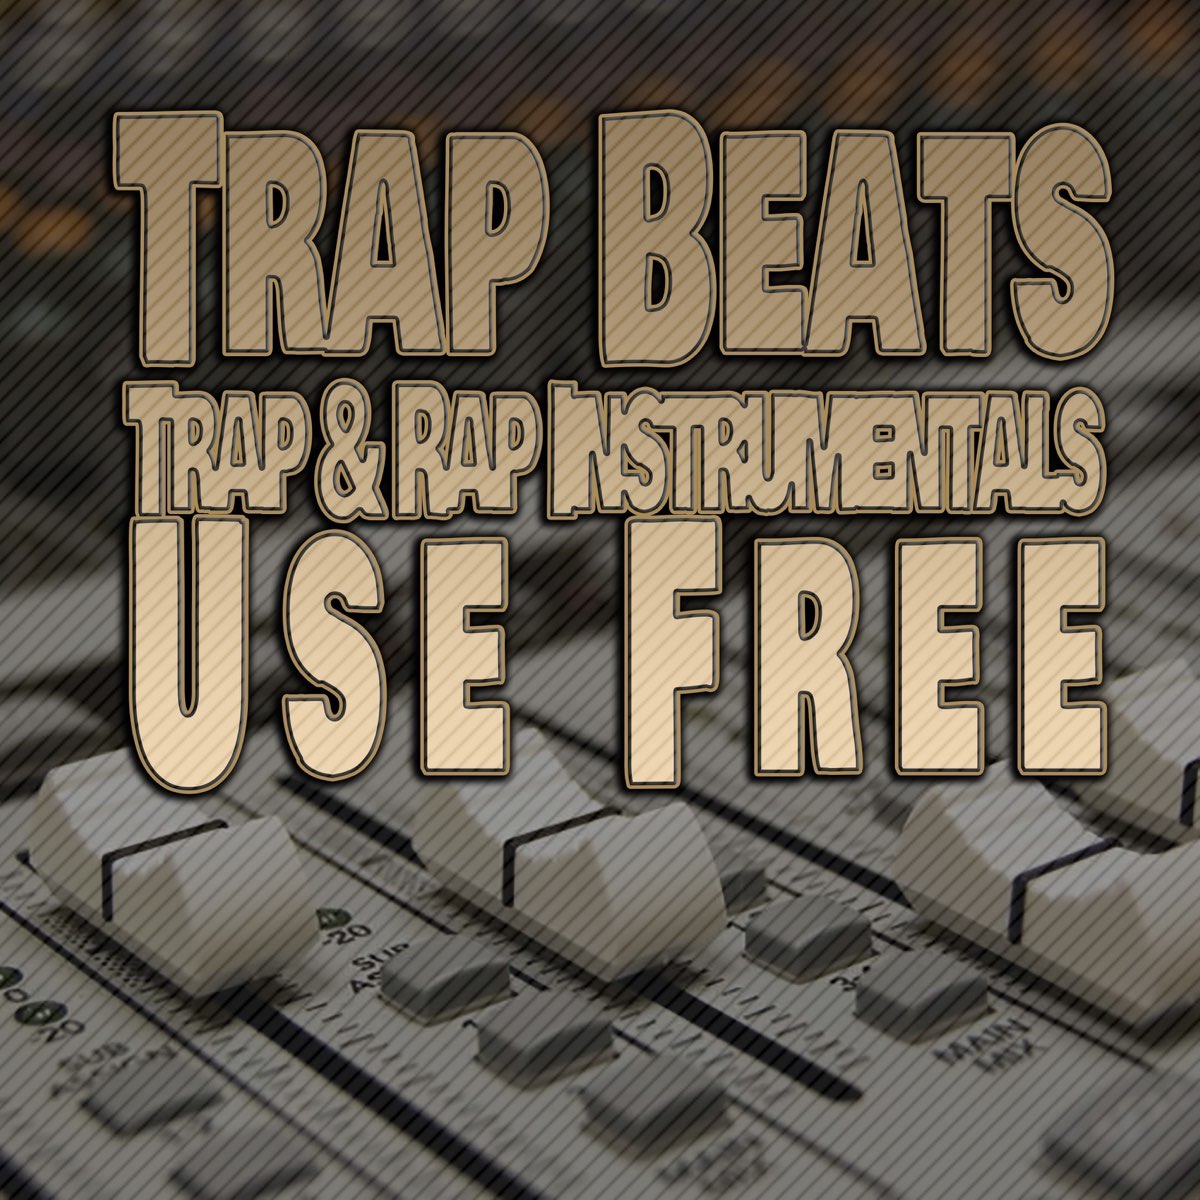 Trap Beats Trap and Rap Instrumentals Use Free - EP - Album by Inhar Beats  - Apple Music